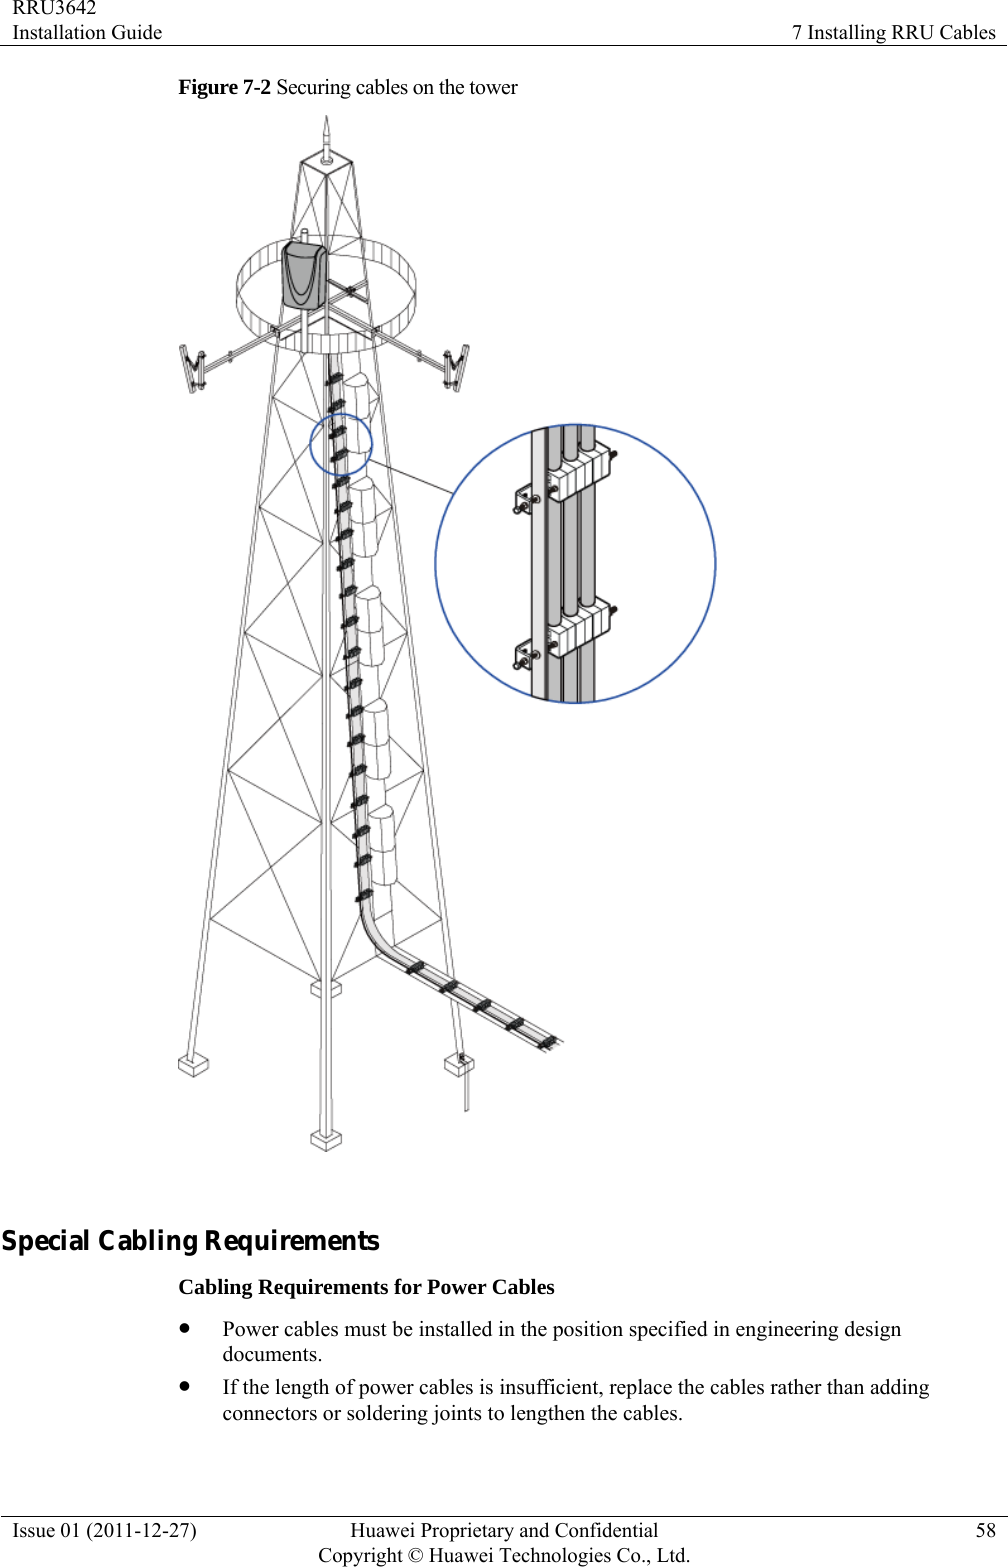 RRU3642 Installation Guide  7 Installing RRU Cables Issue 01 (2011-12-27)  Huawei Proprietary and Confidential         Copyright © Huawei Technologies Co., Ltd.58 Figure 7-2 Securing cables on the tower   Special Cabling Requirements Cabling Requirements for Power Cables z Power cables must be installed in the position specified in engineering design documents. z If the length of power cables is insufficient, replace the cables rather than adding connectors or soldering joints to lengthen the cables. 